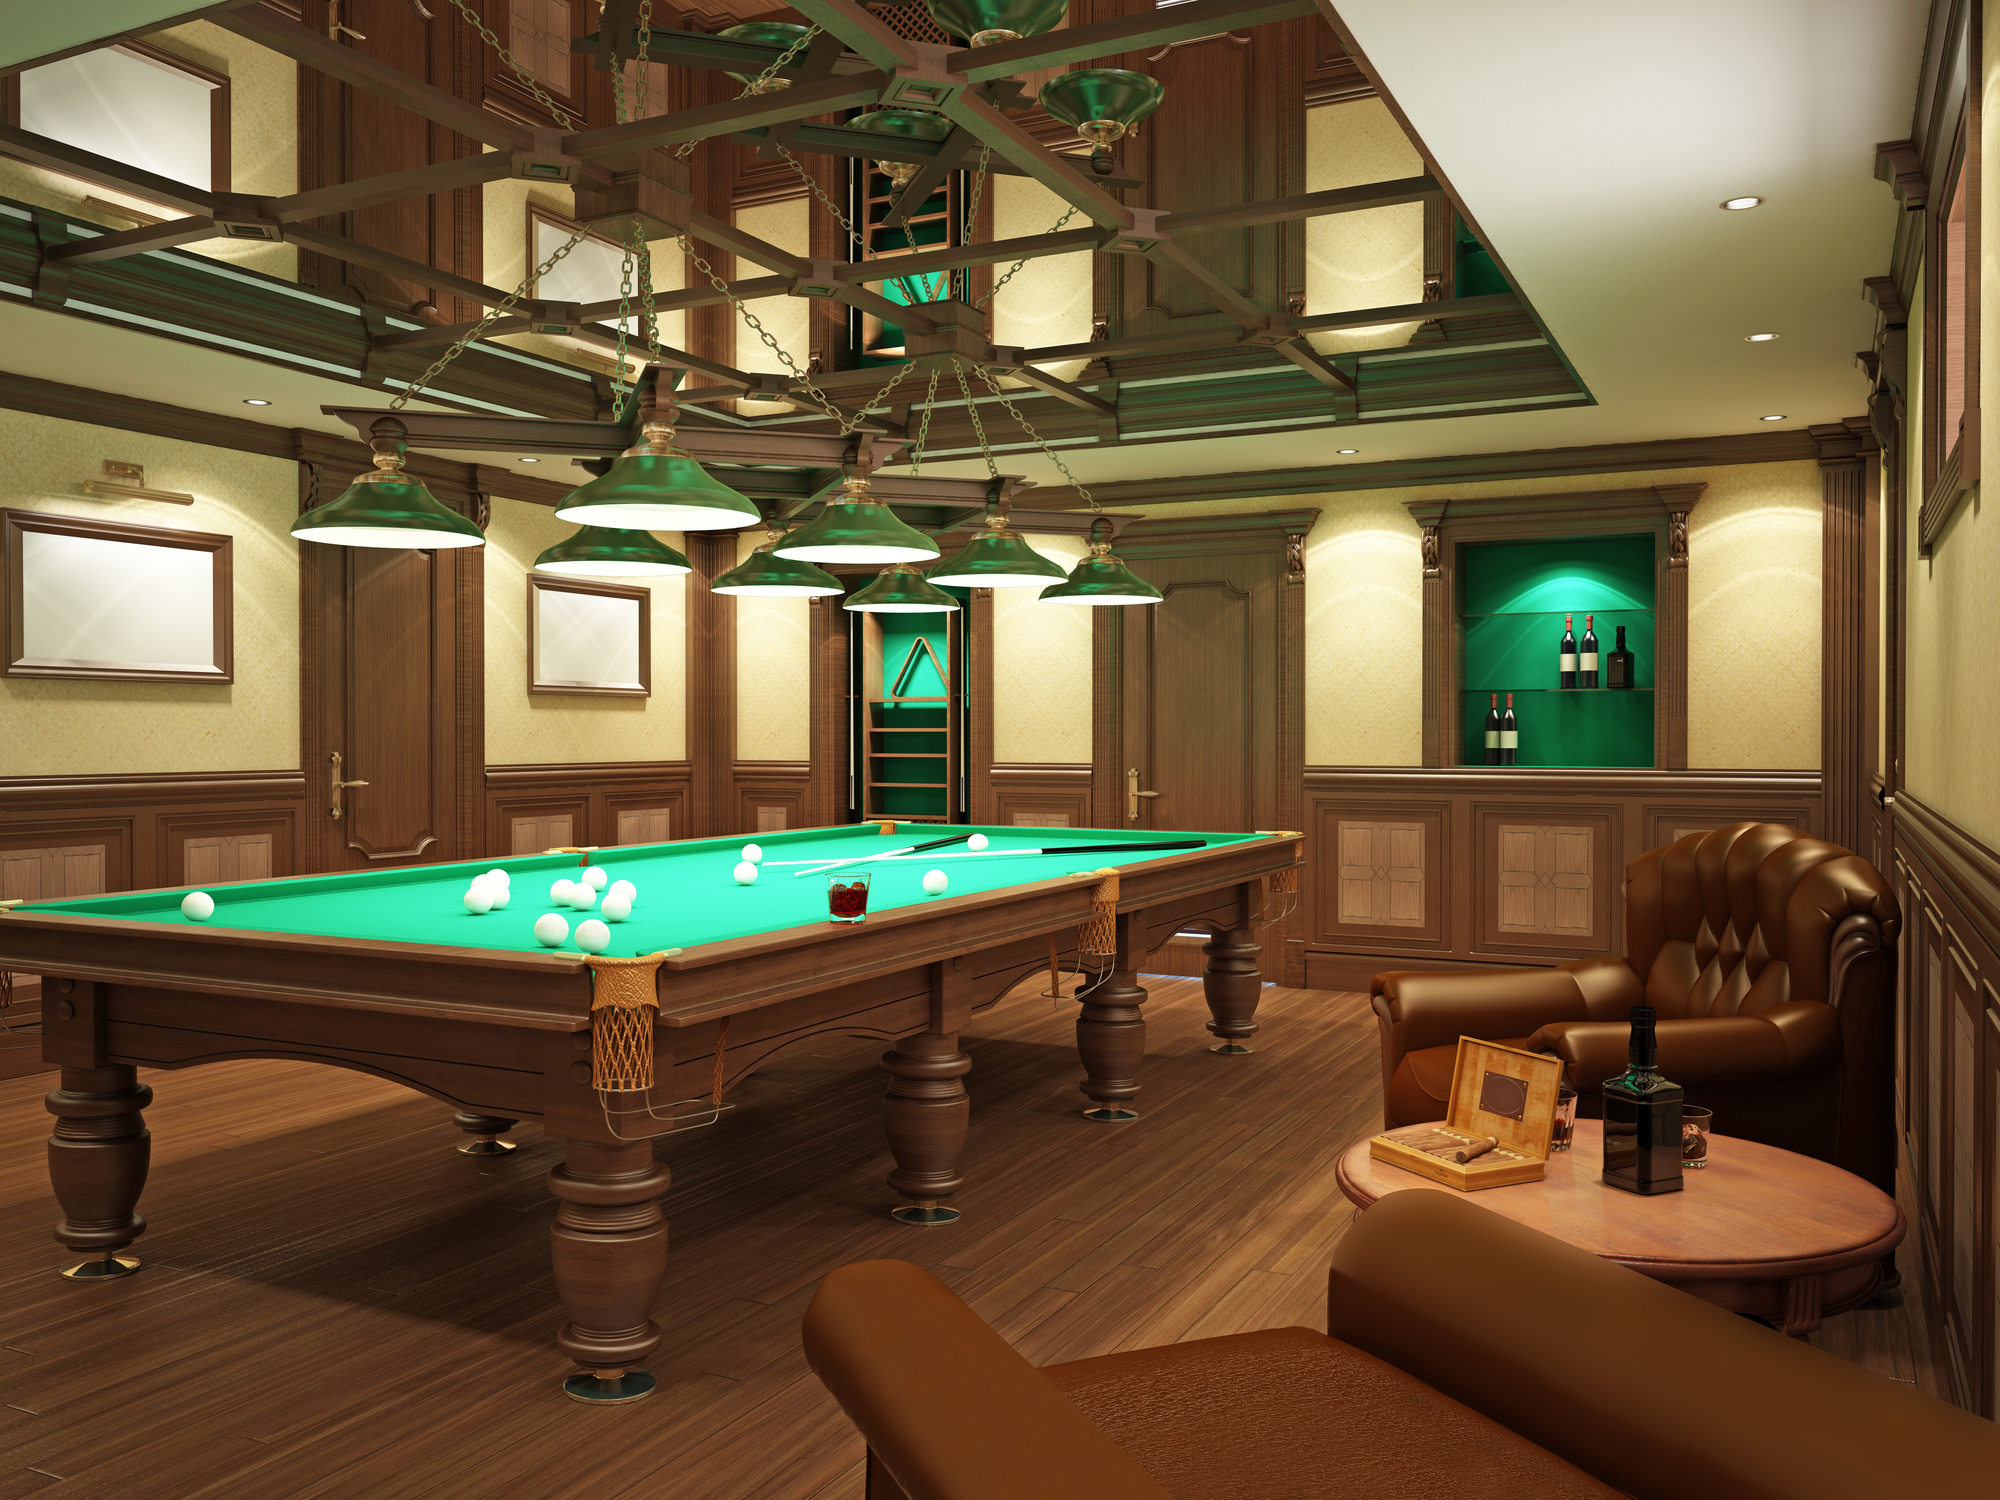 An inviting pool room featuring various pool room accessories such as cue racks and pool room lights creating the perfect atmosphere for leisure and entertainment